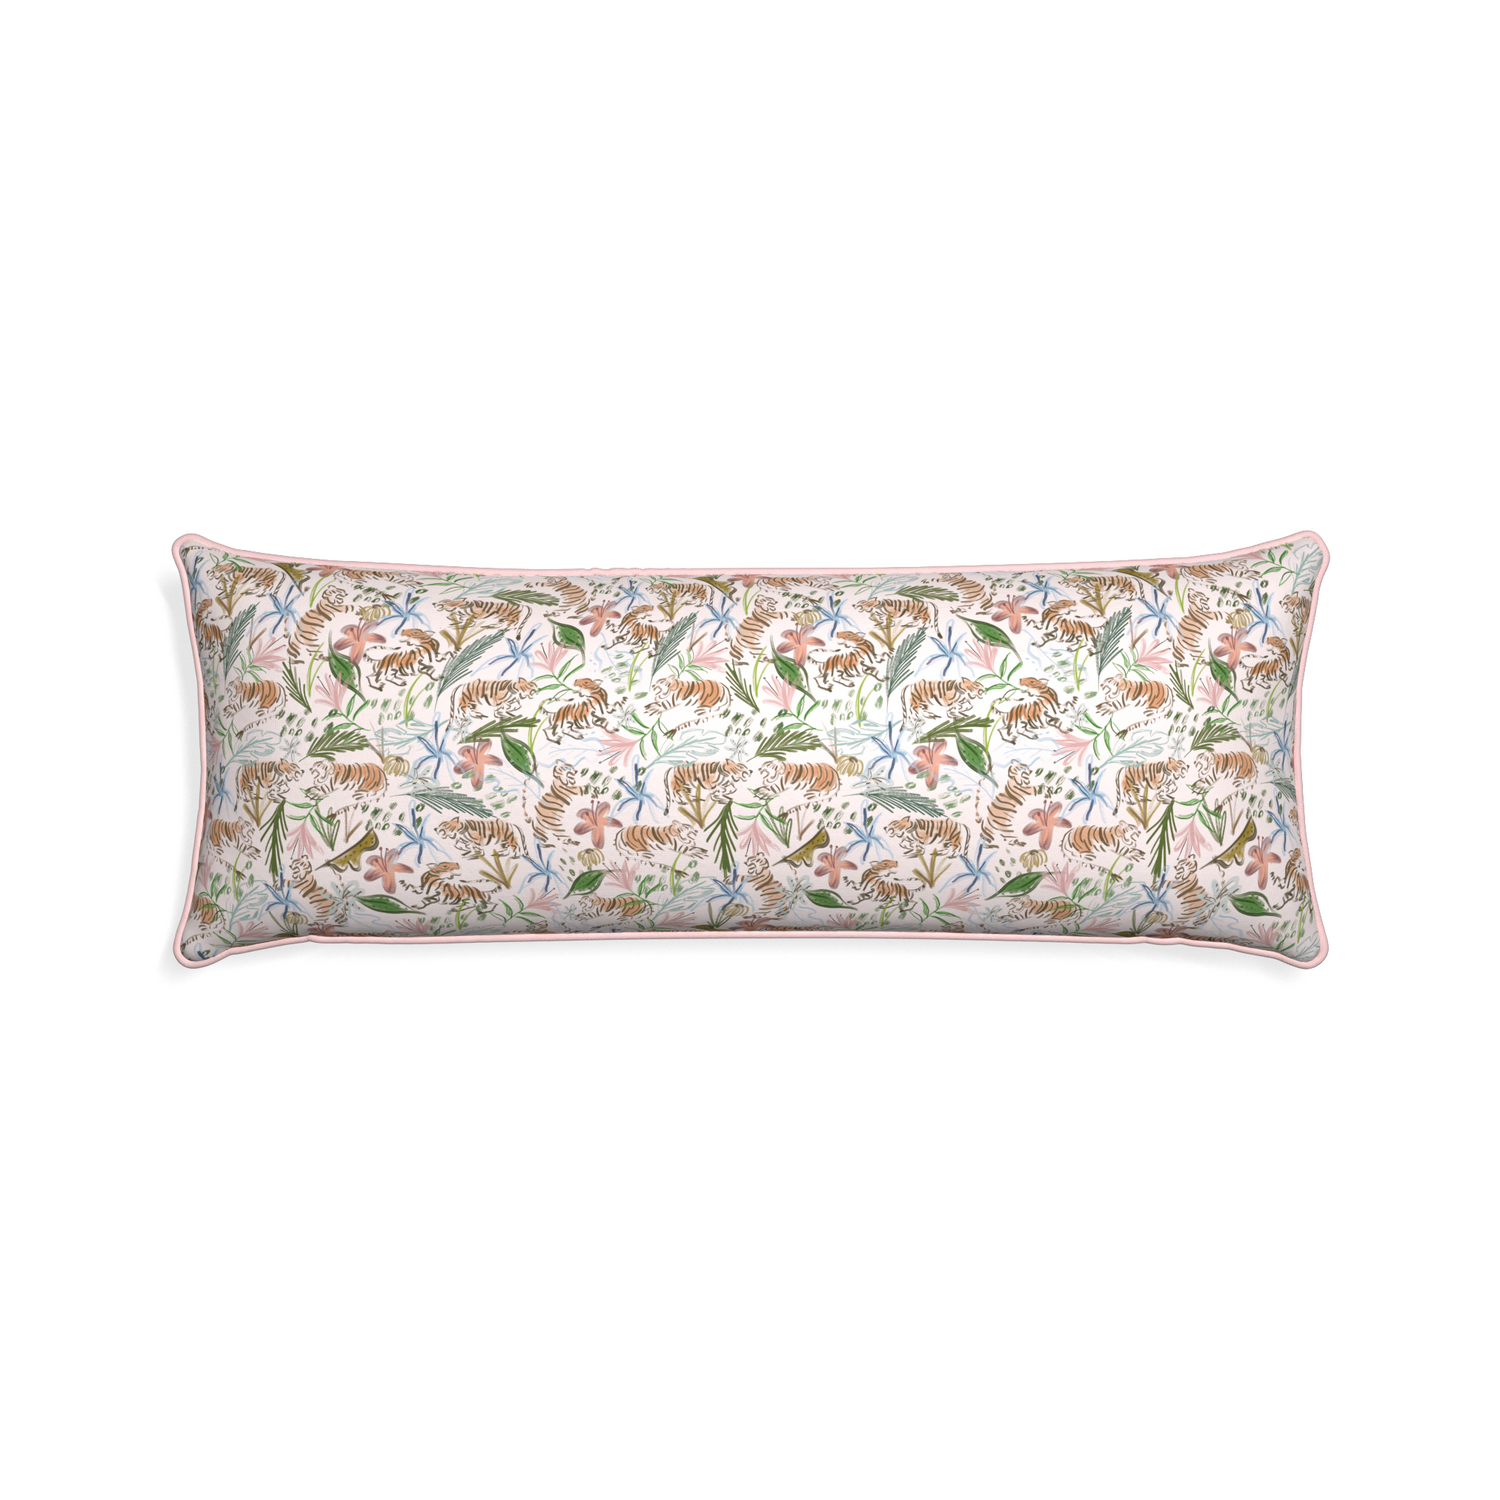 Xl-lumbar frida pink custom pink chinoiserie tigerpillow with petal piping on white background